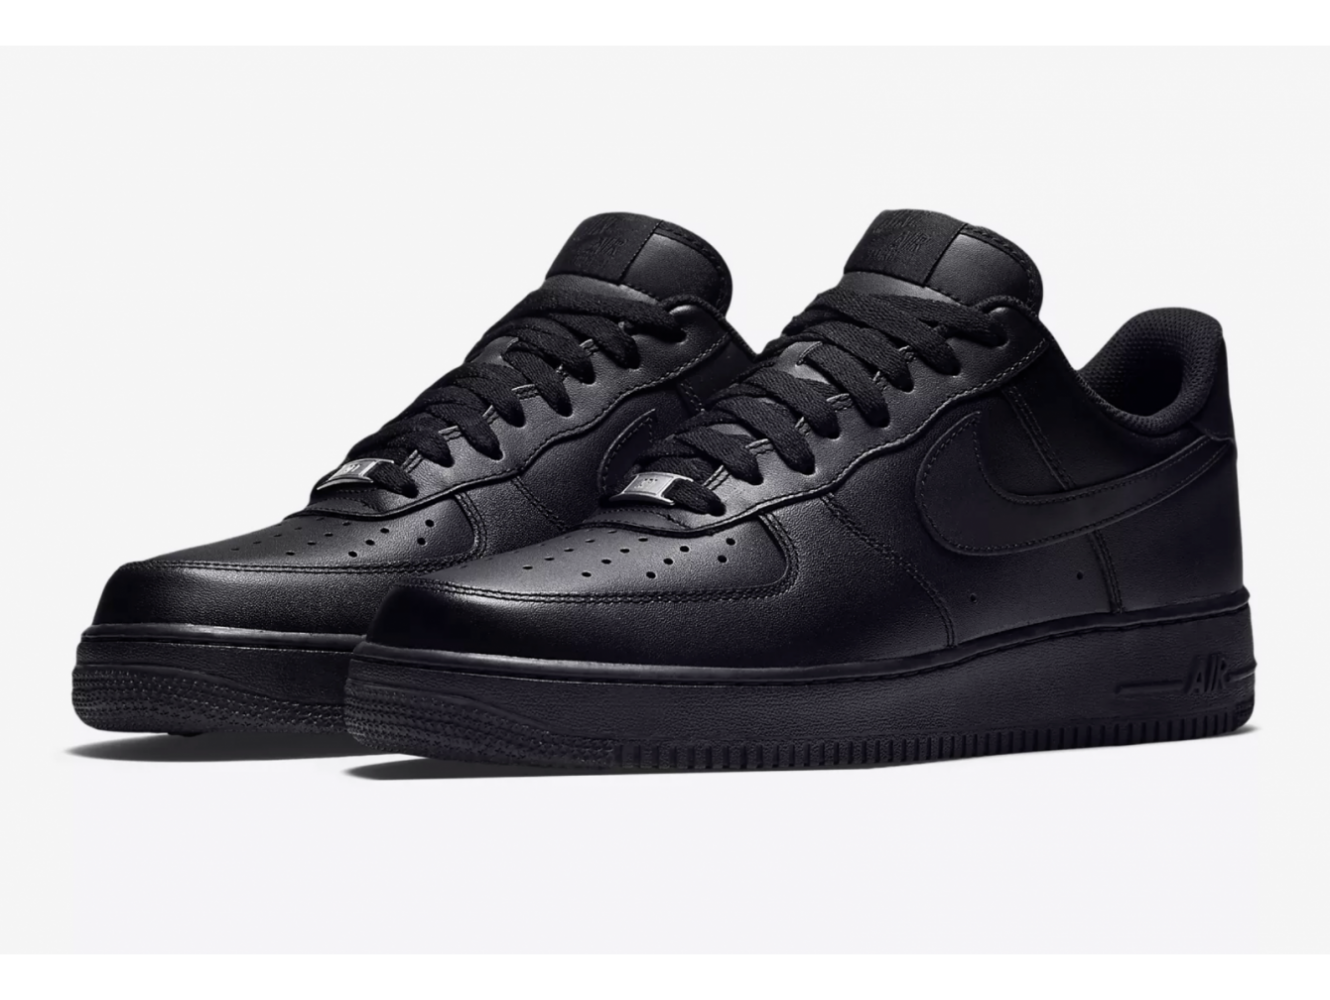 Force first force. Nike Air Force 1 Low черные. Nike Air Force 1 '07 Low all Black черные. Nike Air Force 1 07 Black мужские. Nike Air Force 1 Black.